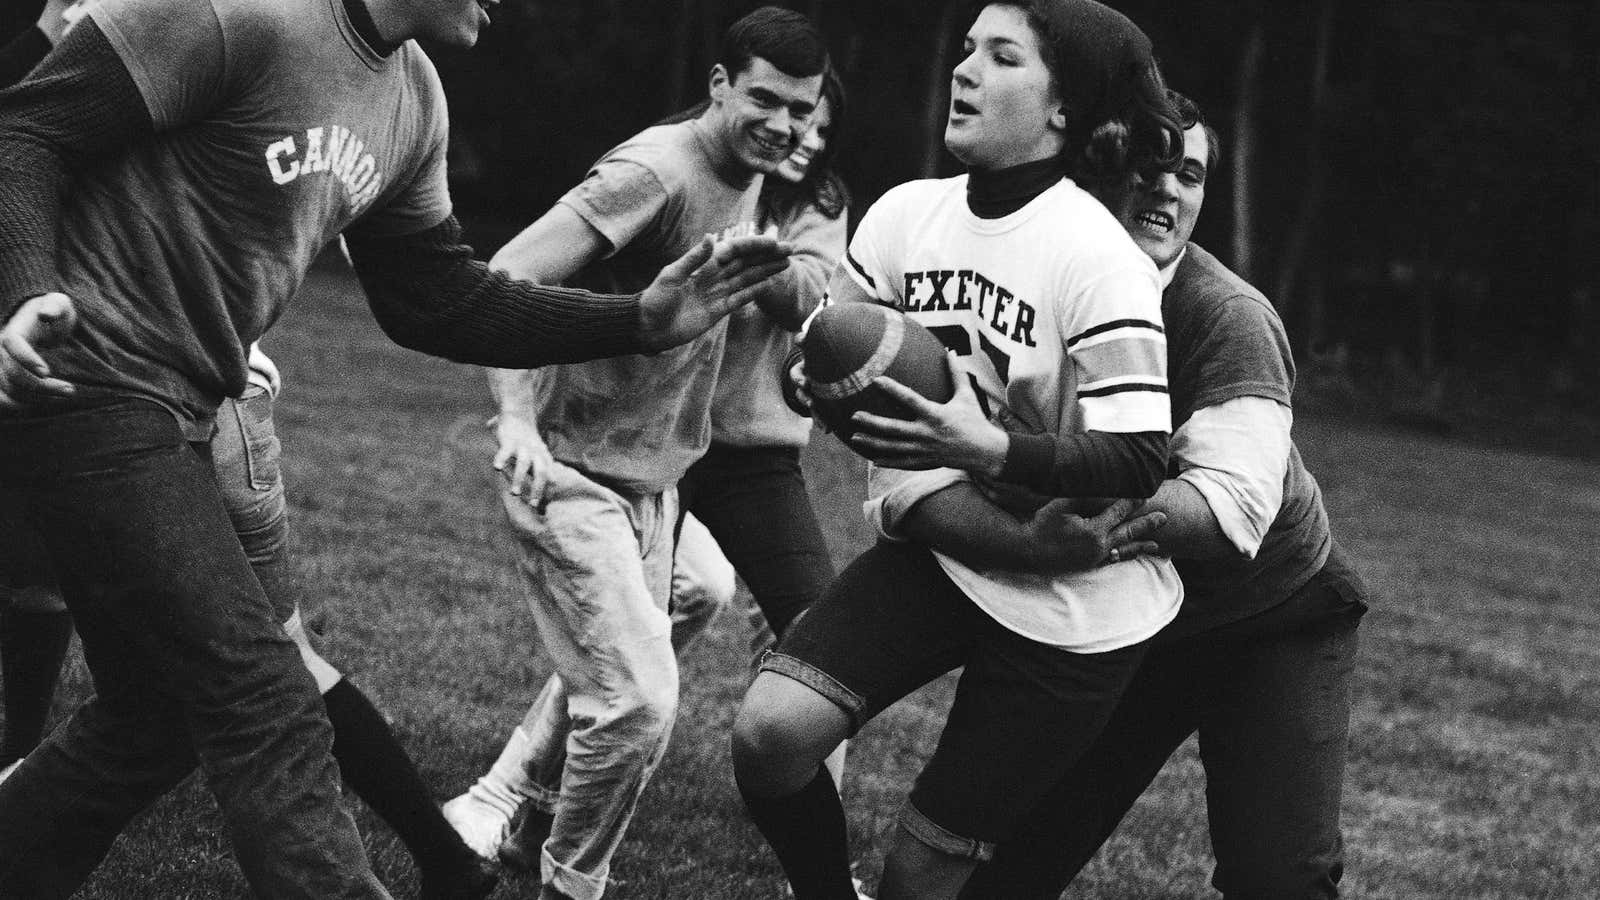 A 1965 “battle of the sexes” football game between Vassar and Princeton. In reality, it’s the women who face pressure to find a mate in college—and hang onto him.